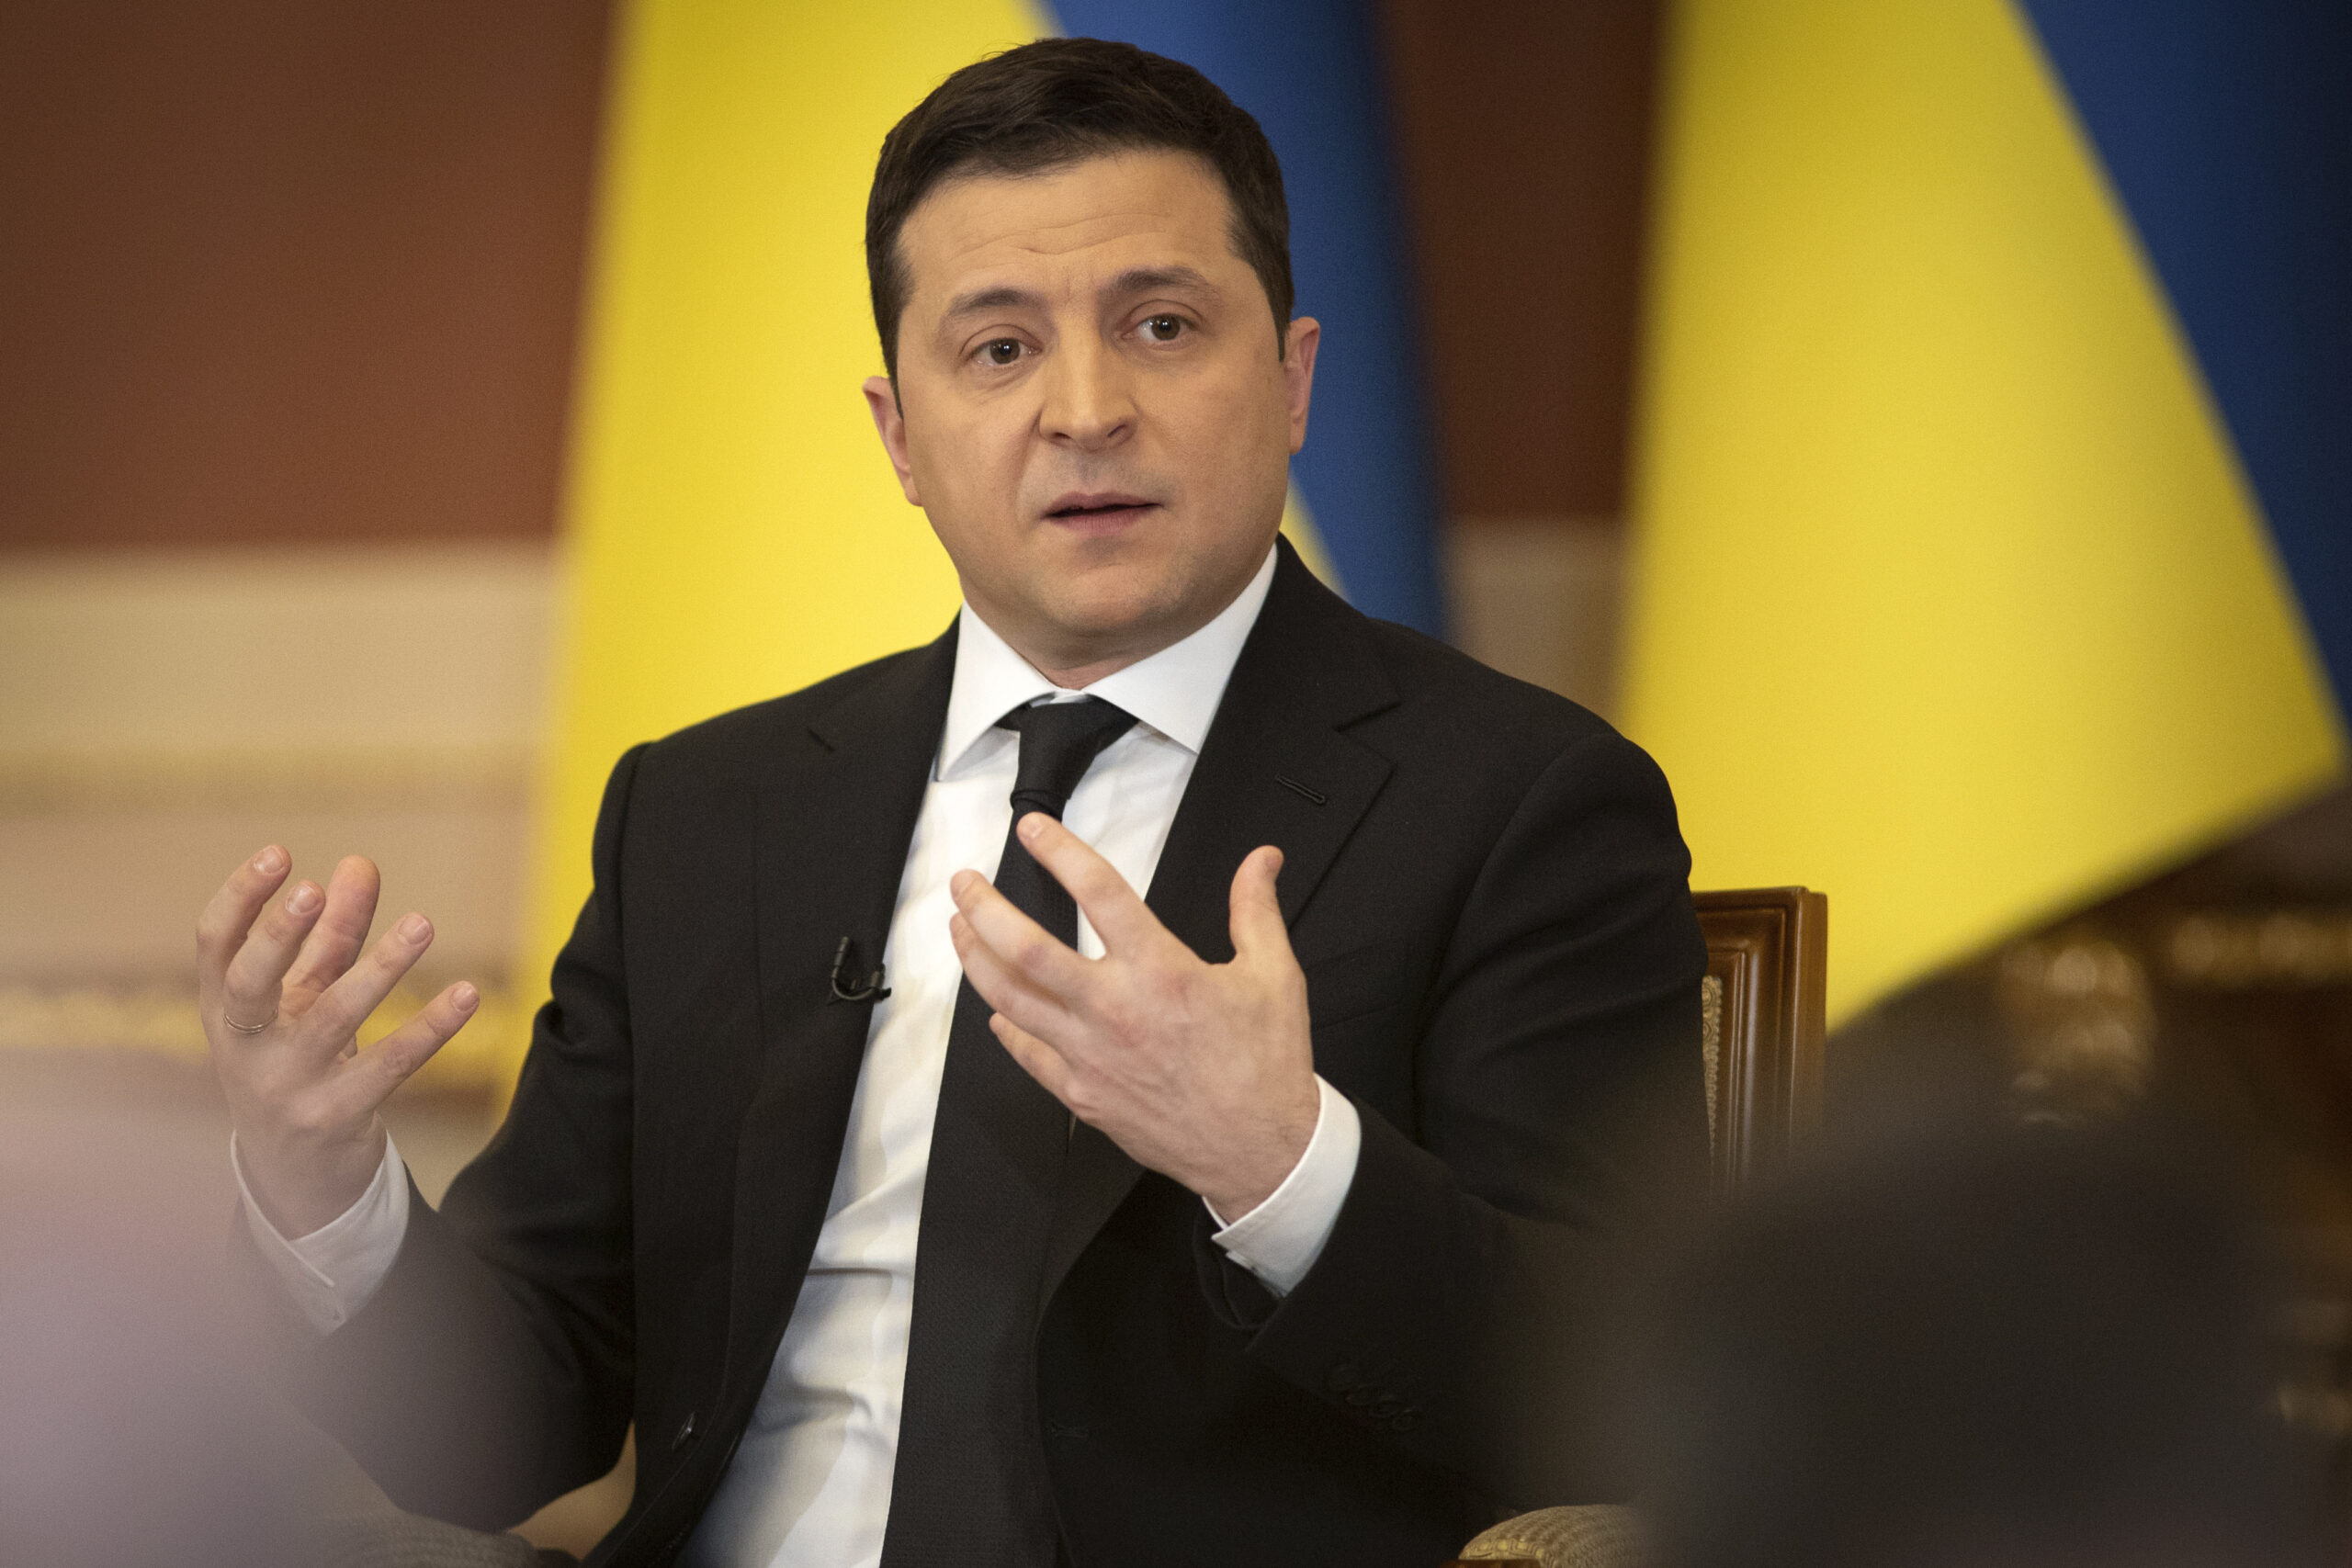 We have no need for foreign troops in our territory: Ukraine